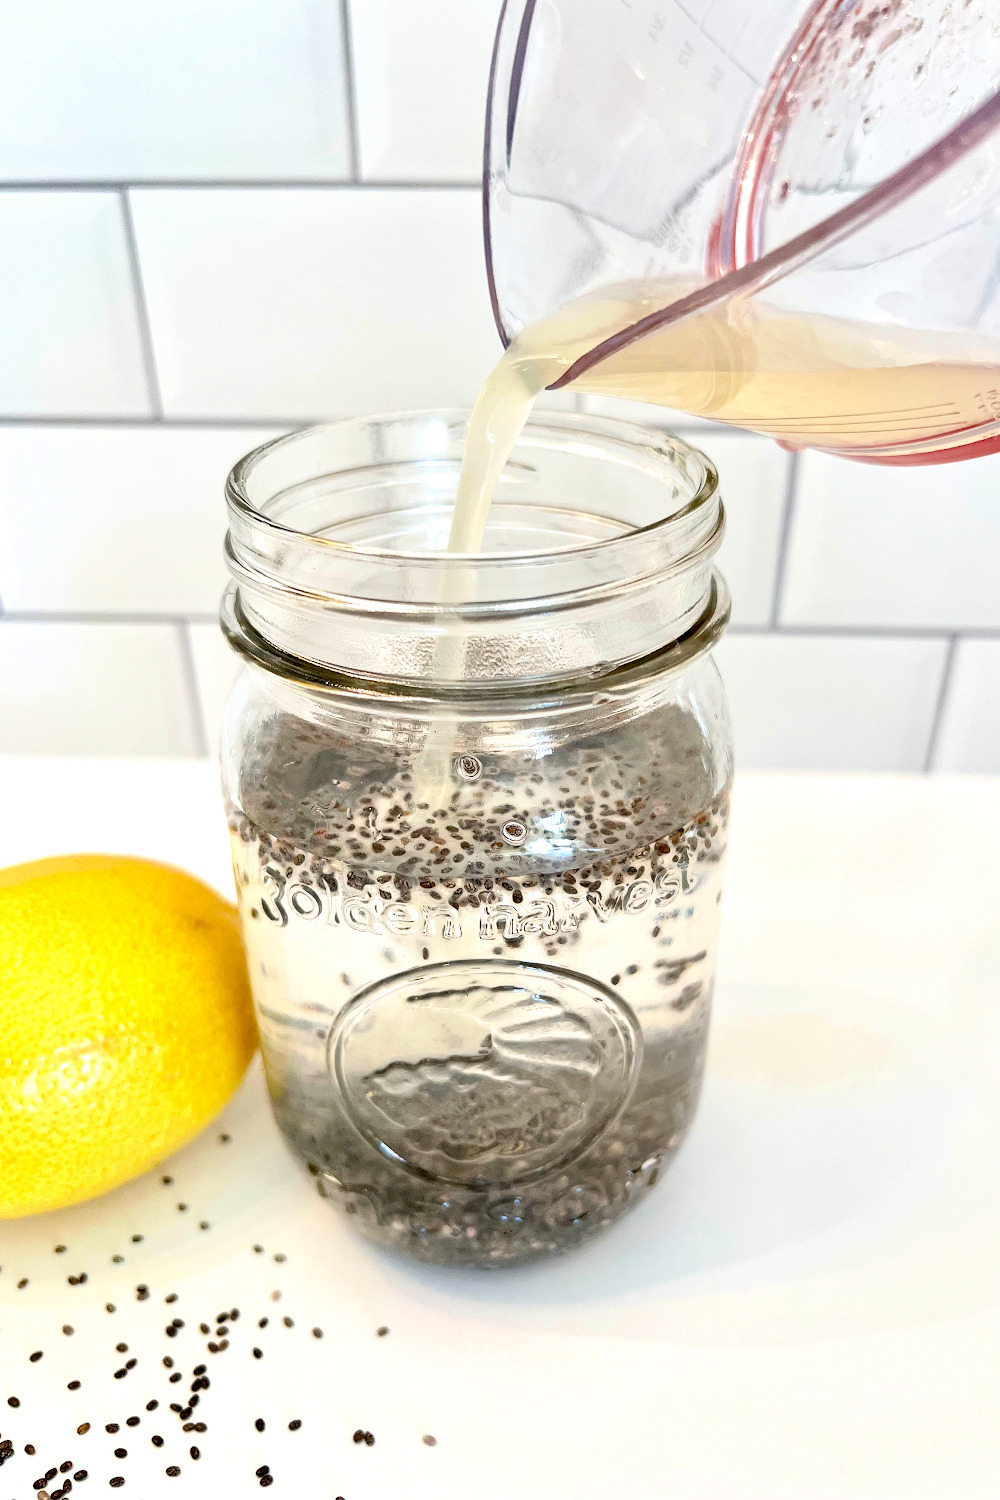 how to add chia seeds to make a chia seed detox water. Pouring lemon into the chia water.